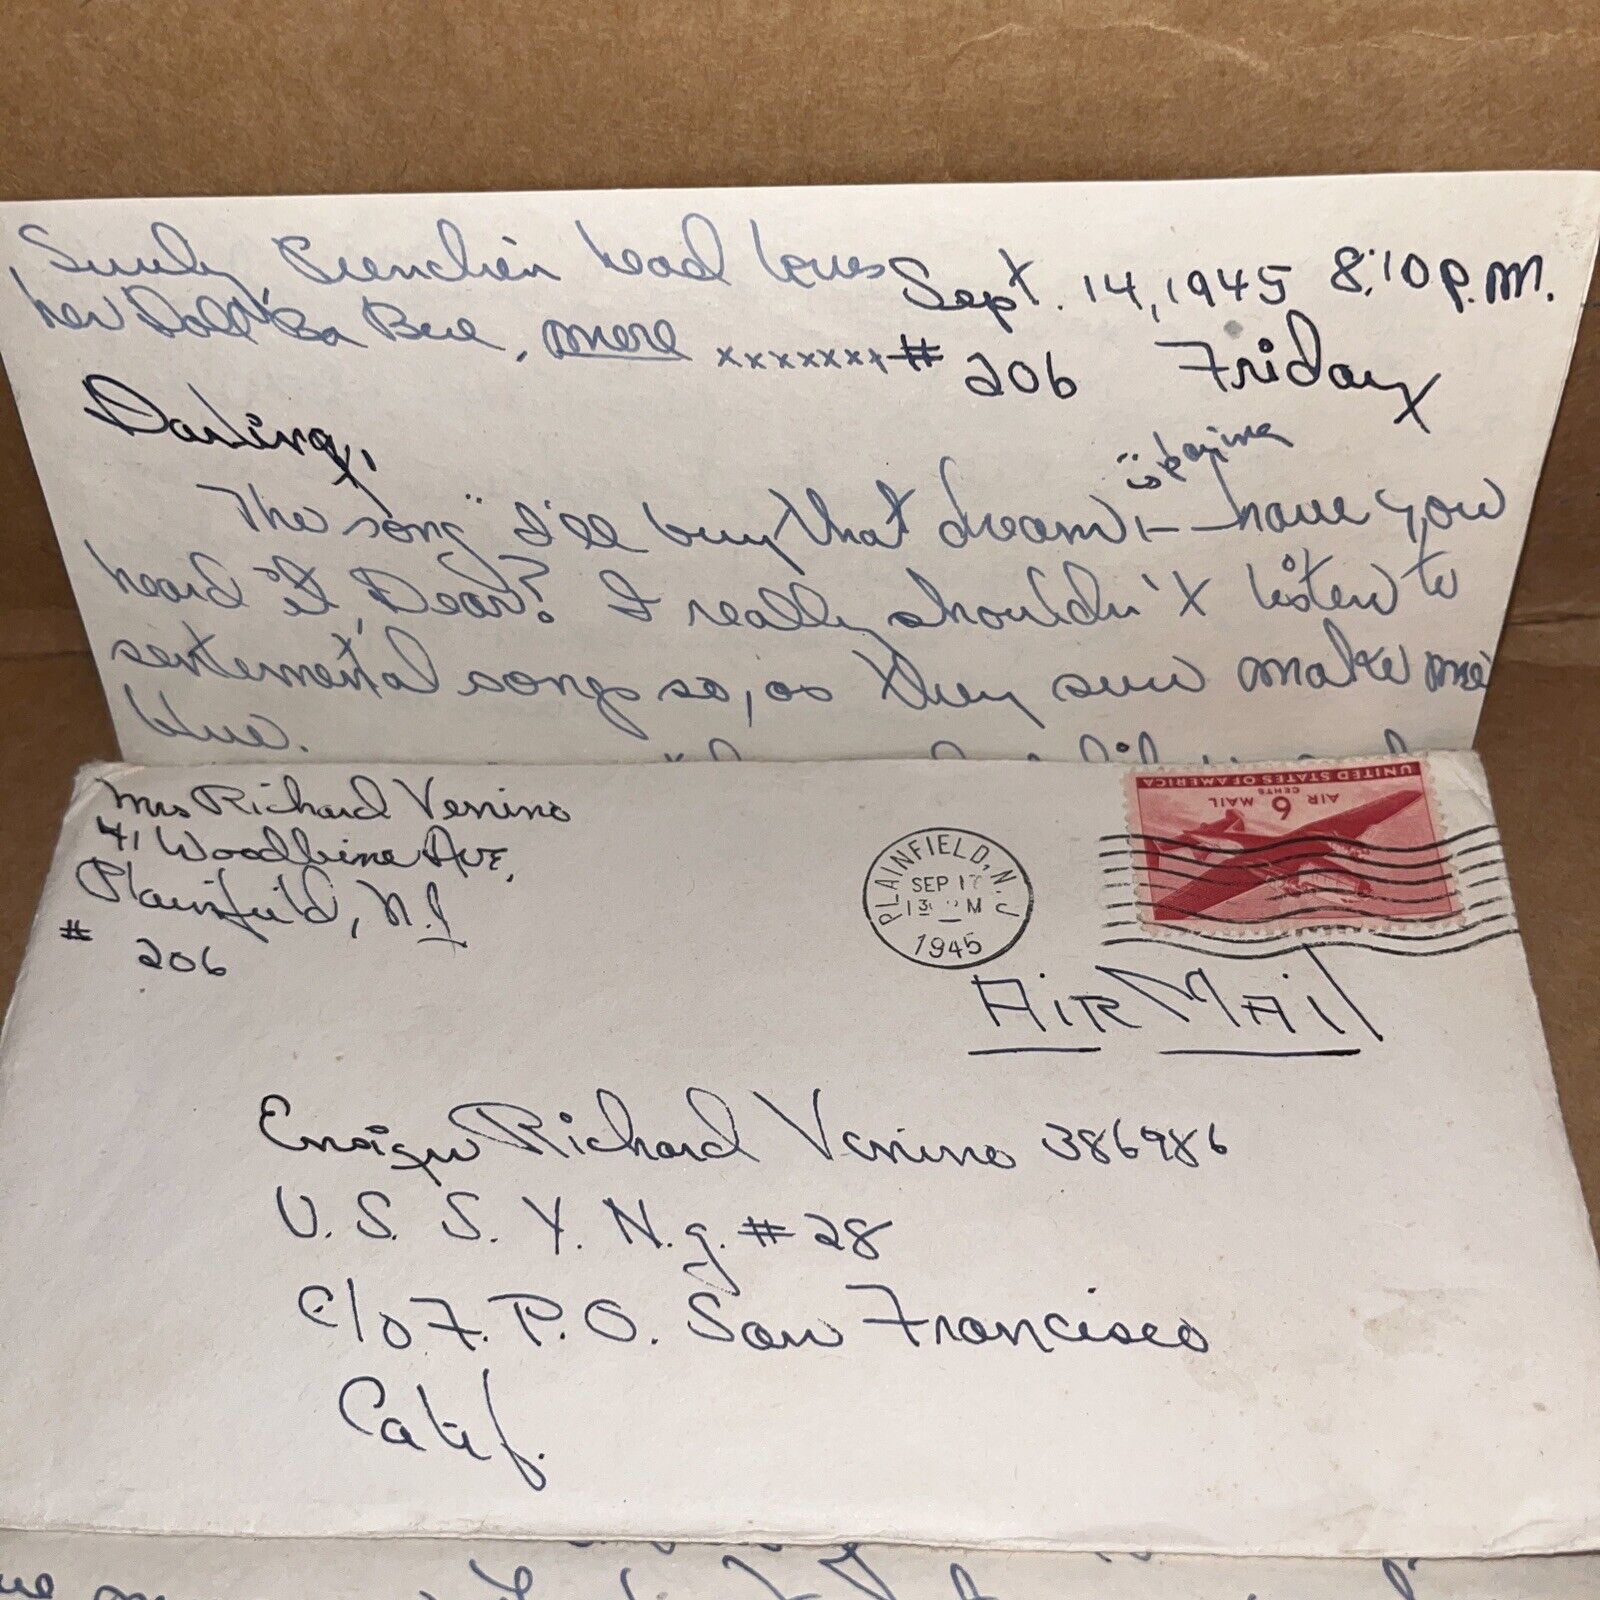 1945 Love Letter Wife To US Navy Ensign Warning Against Joining Regulars WWII